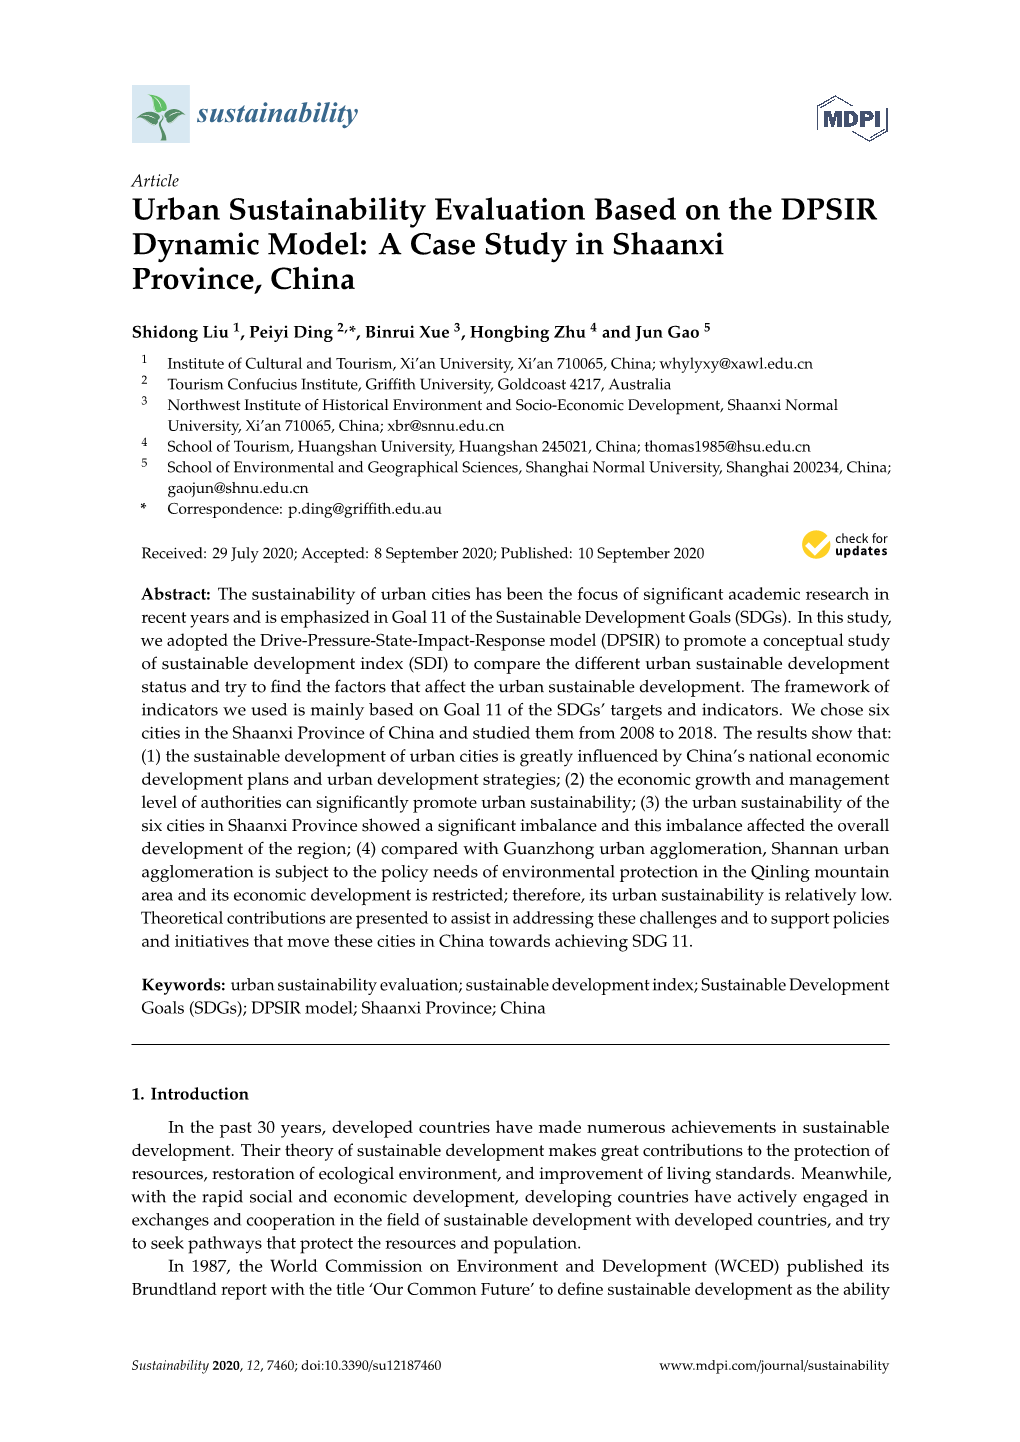 Urban Sustainability Evaluation Based on the DPSIR Dynamic Model: a Case Study in Shaanxi Province, China